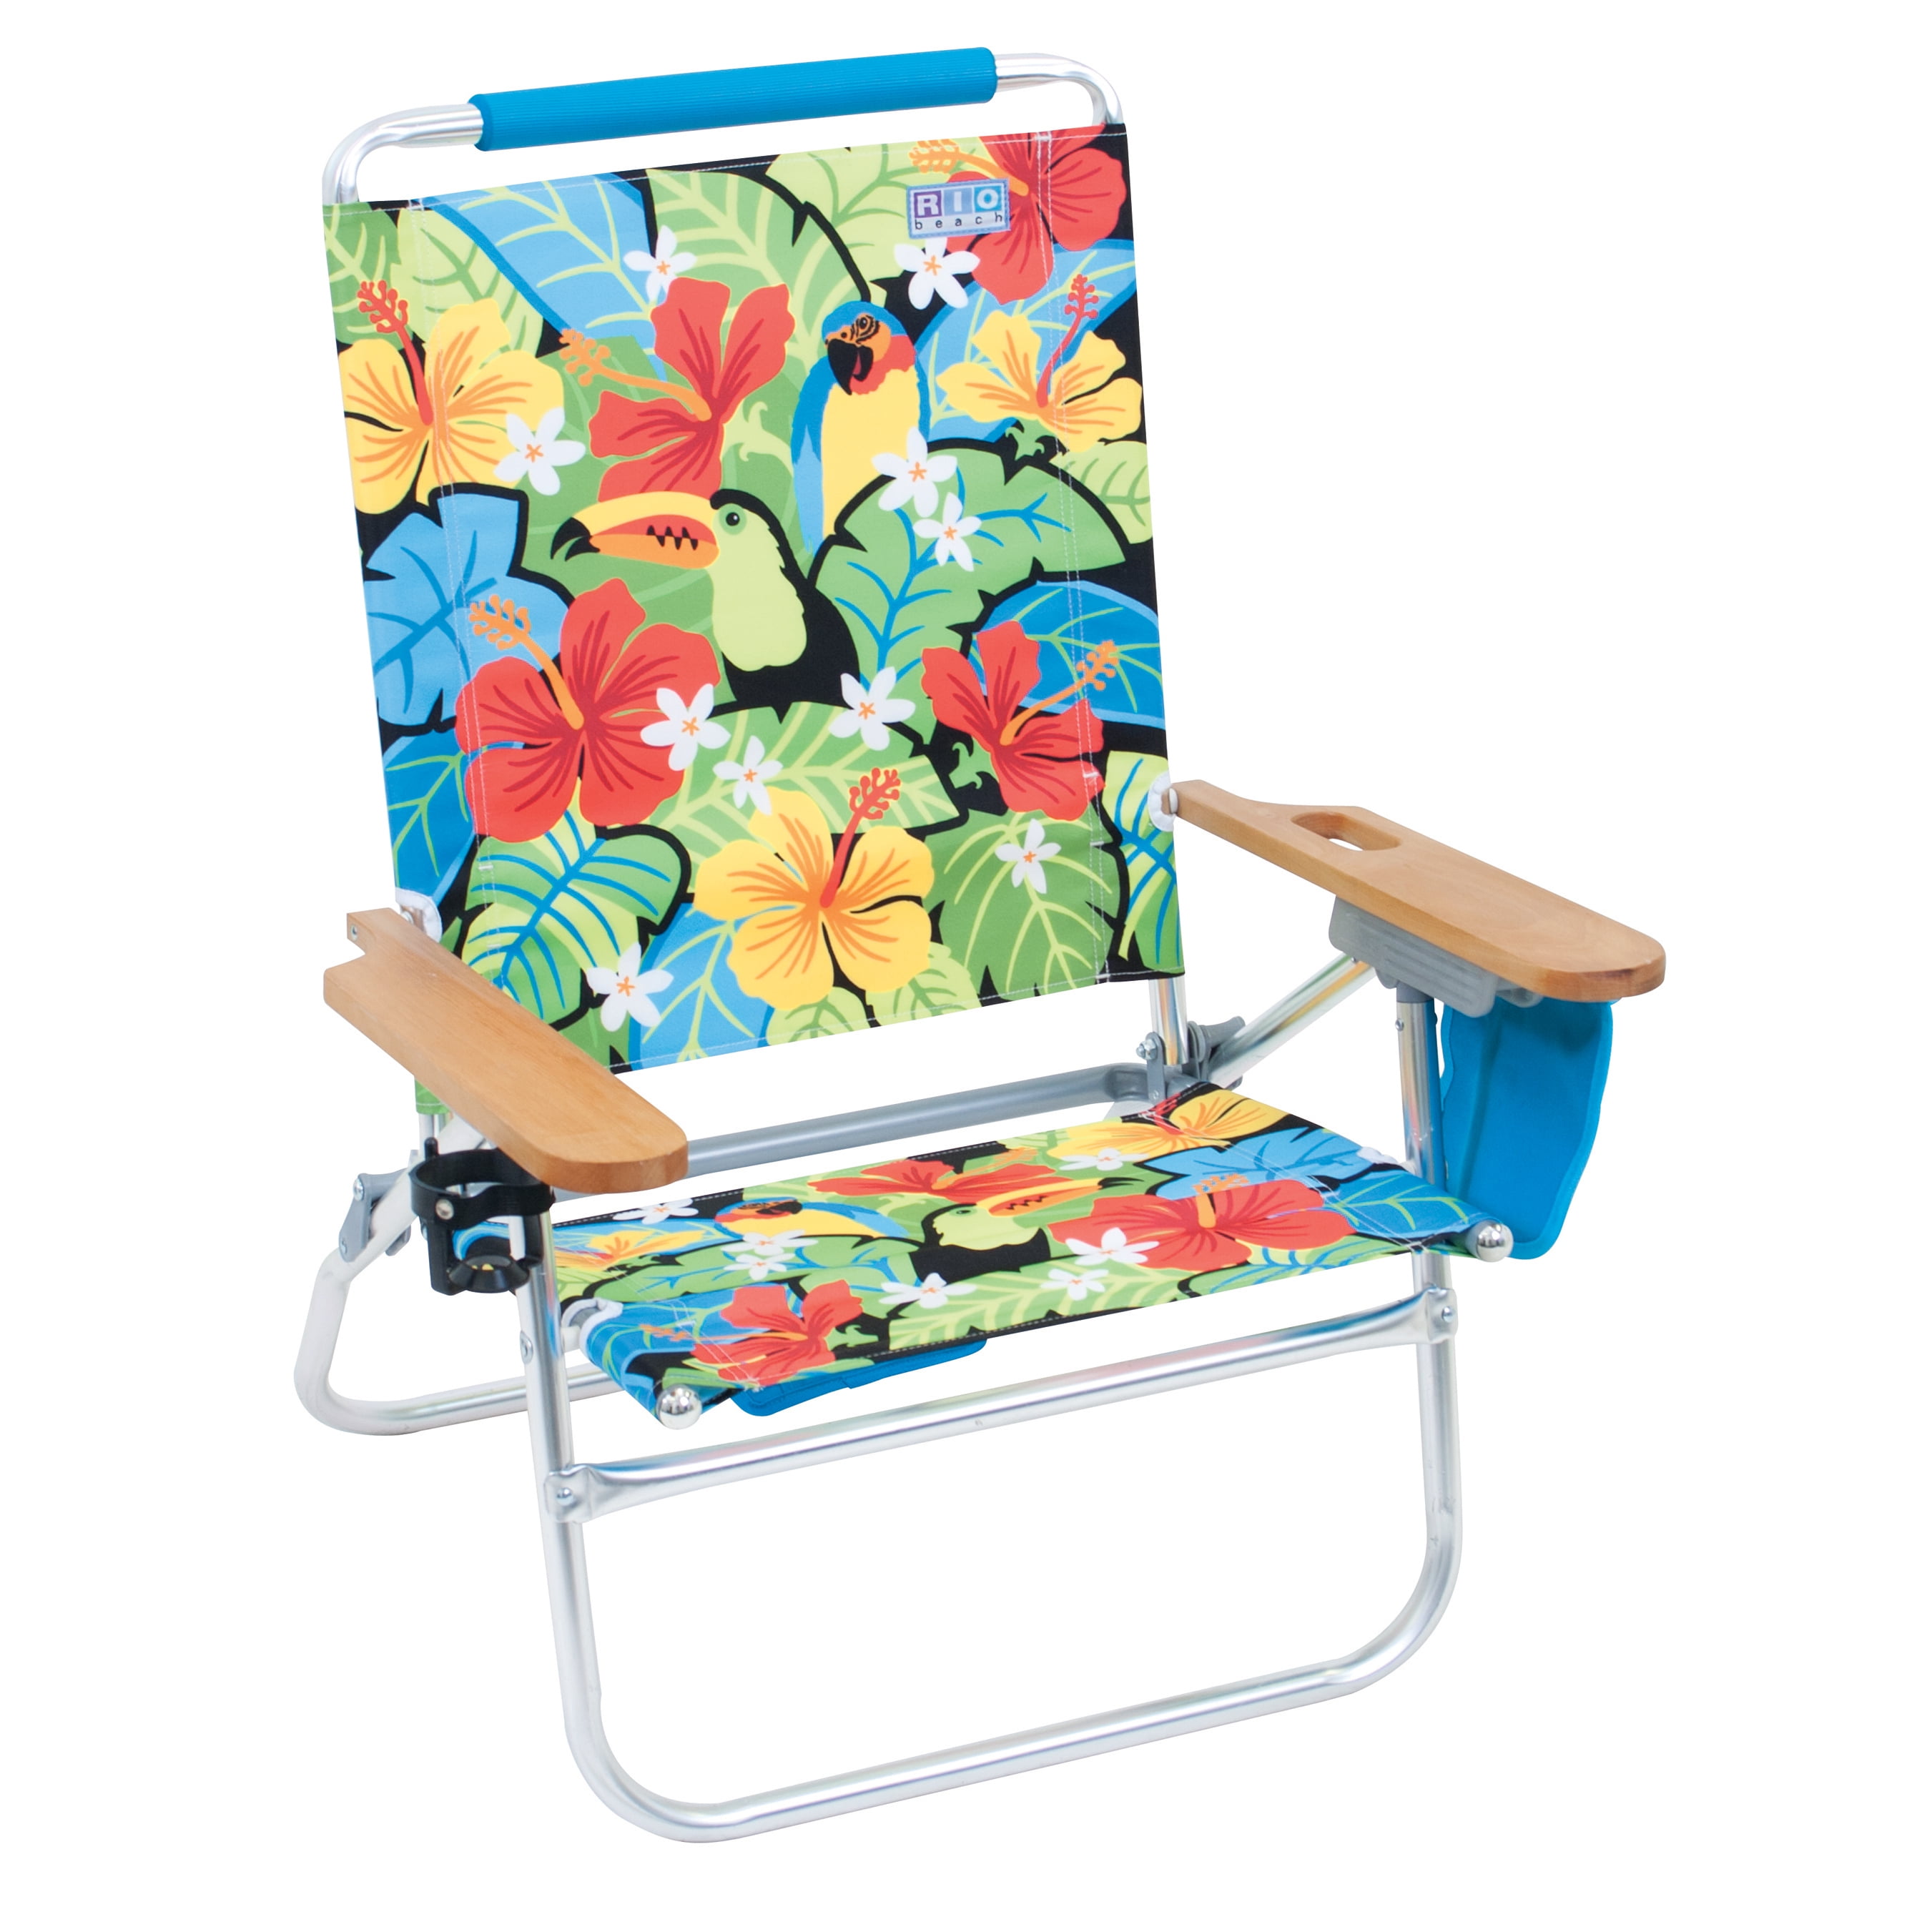 Creatice Rio Original 4 Position Easy In Easy Out Beach Chair for Simple Design